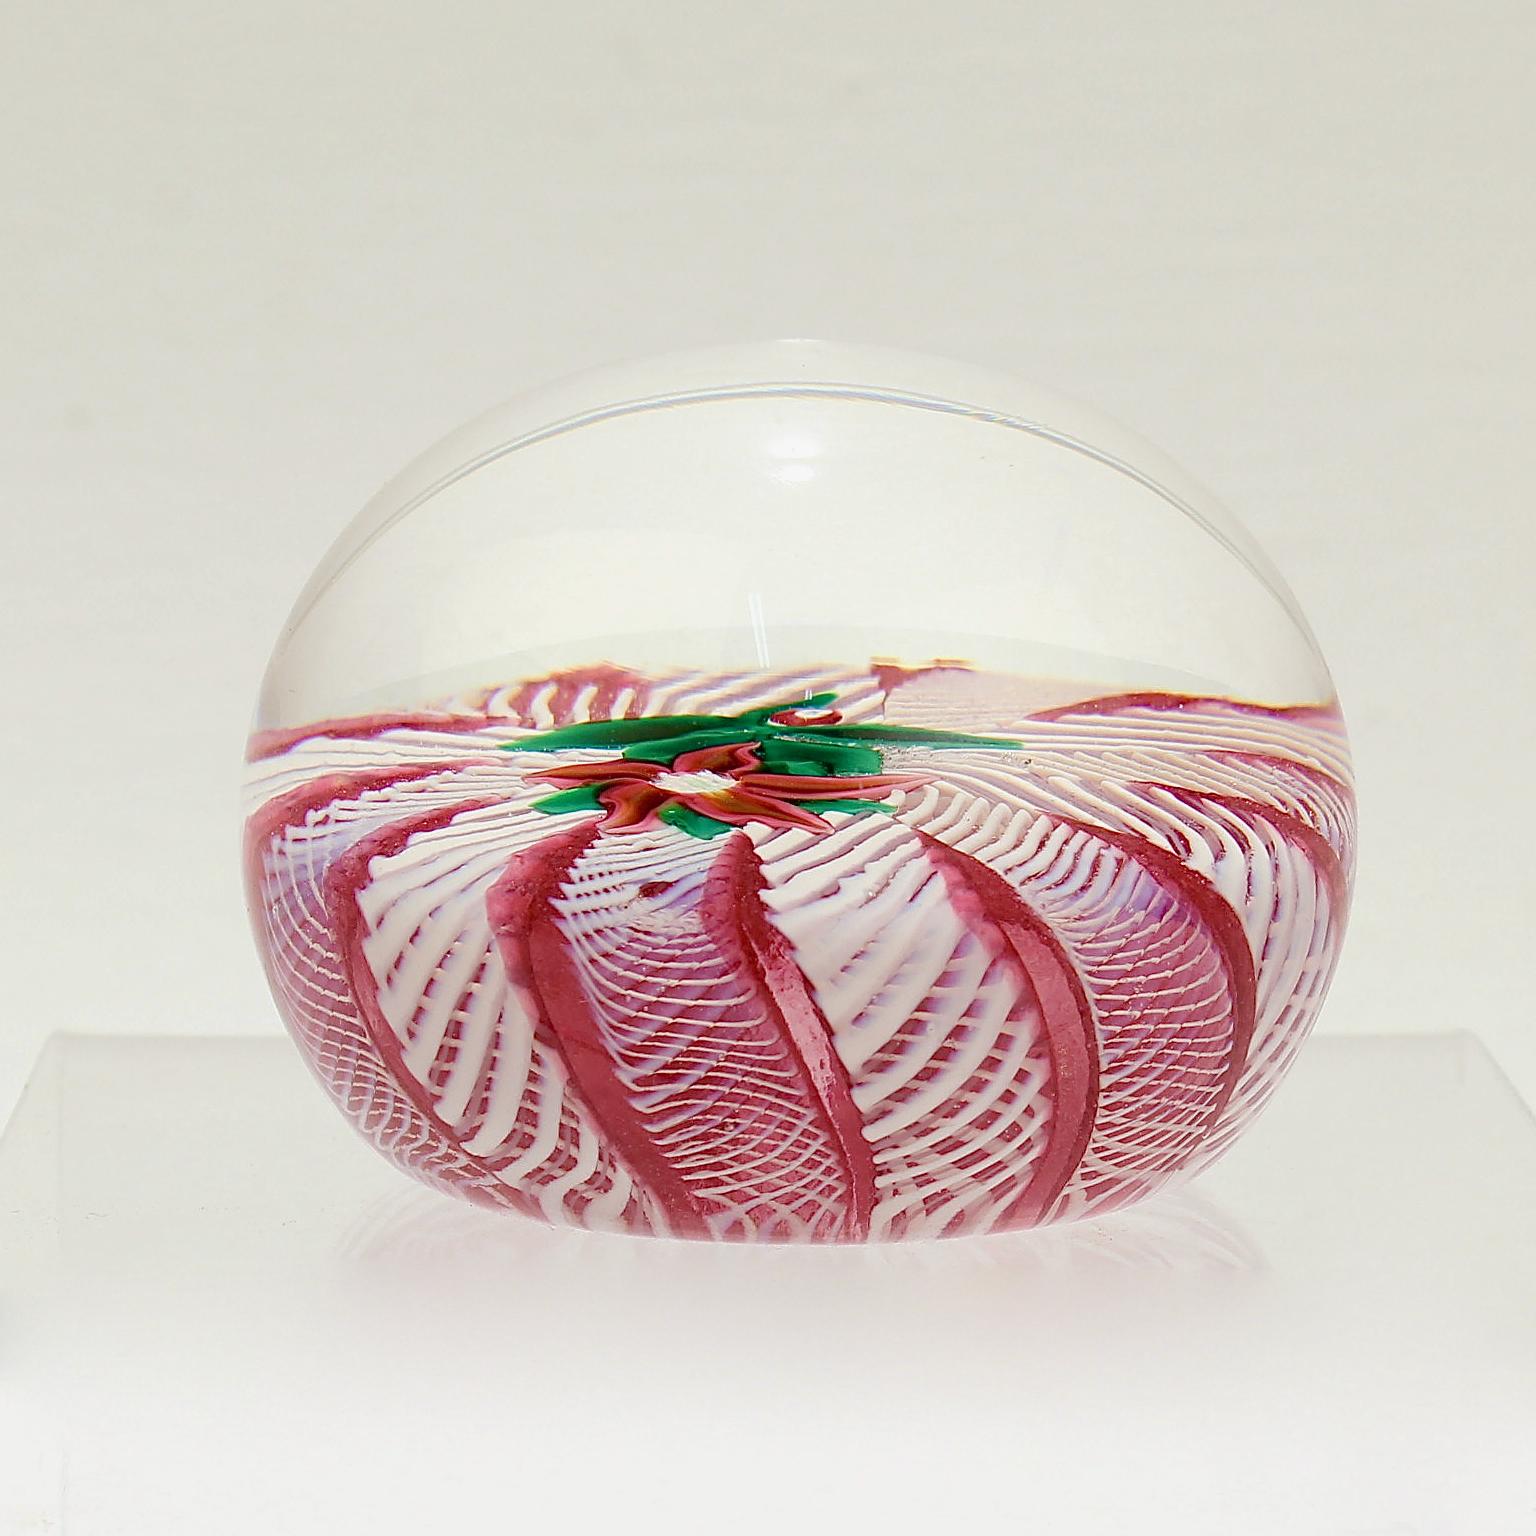  Paul Ysart Poinsettia on a Pink & White Latticino Ground Glass Paperweight For Sale 3